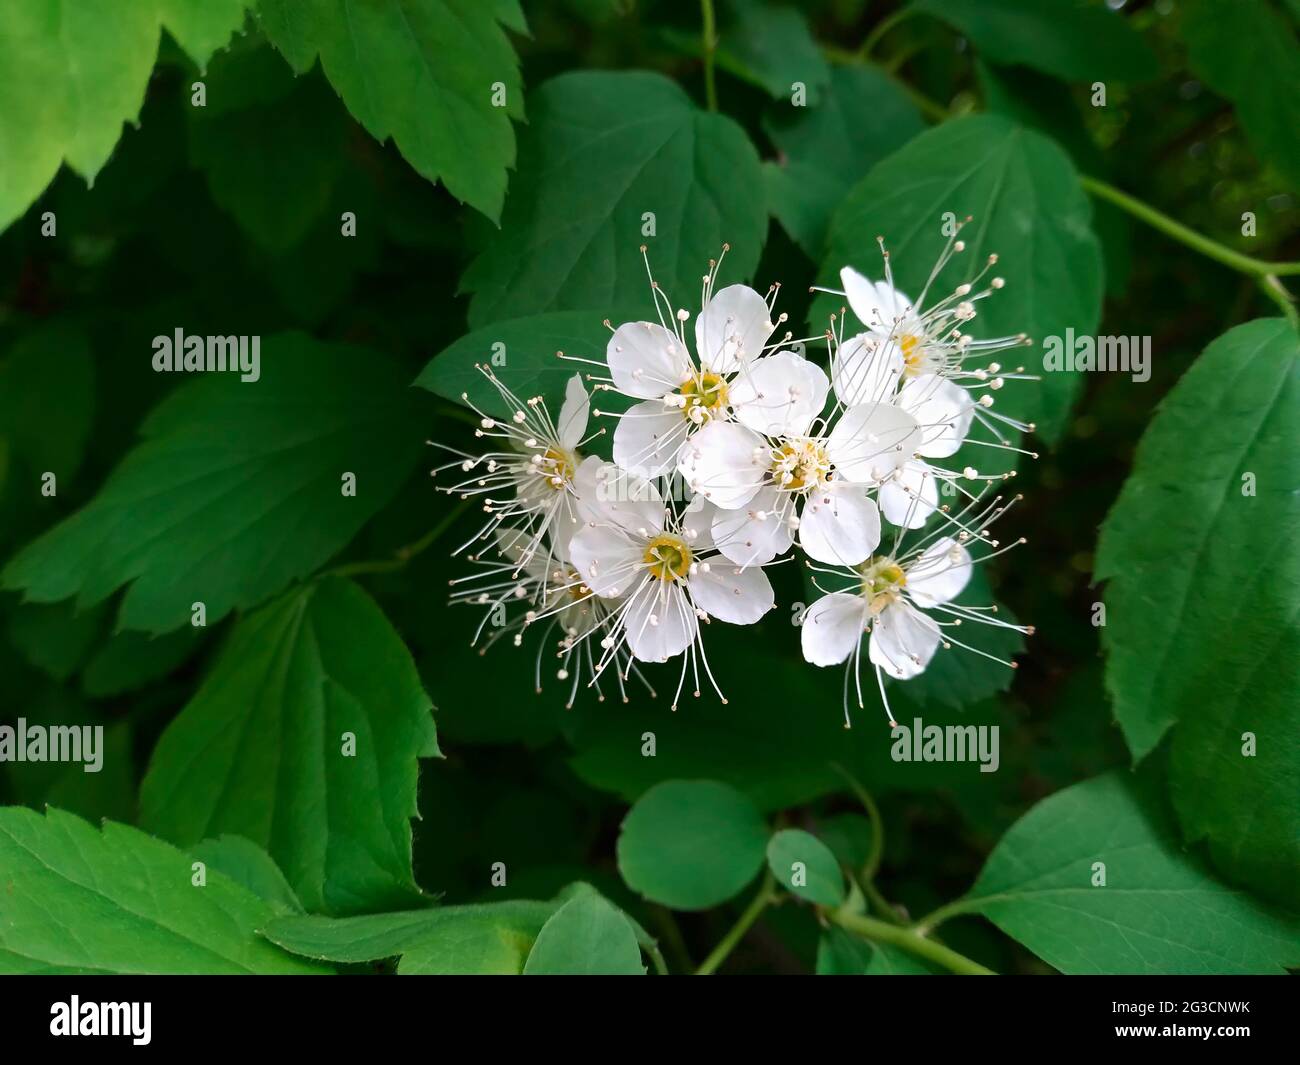 White flowers of the blossoming spirea chamaedryfolia bush, closeup view. Spring time. Stock Photo